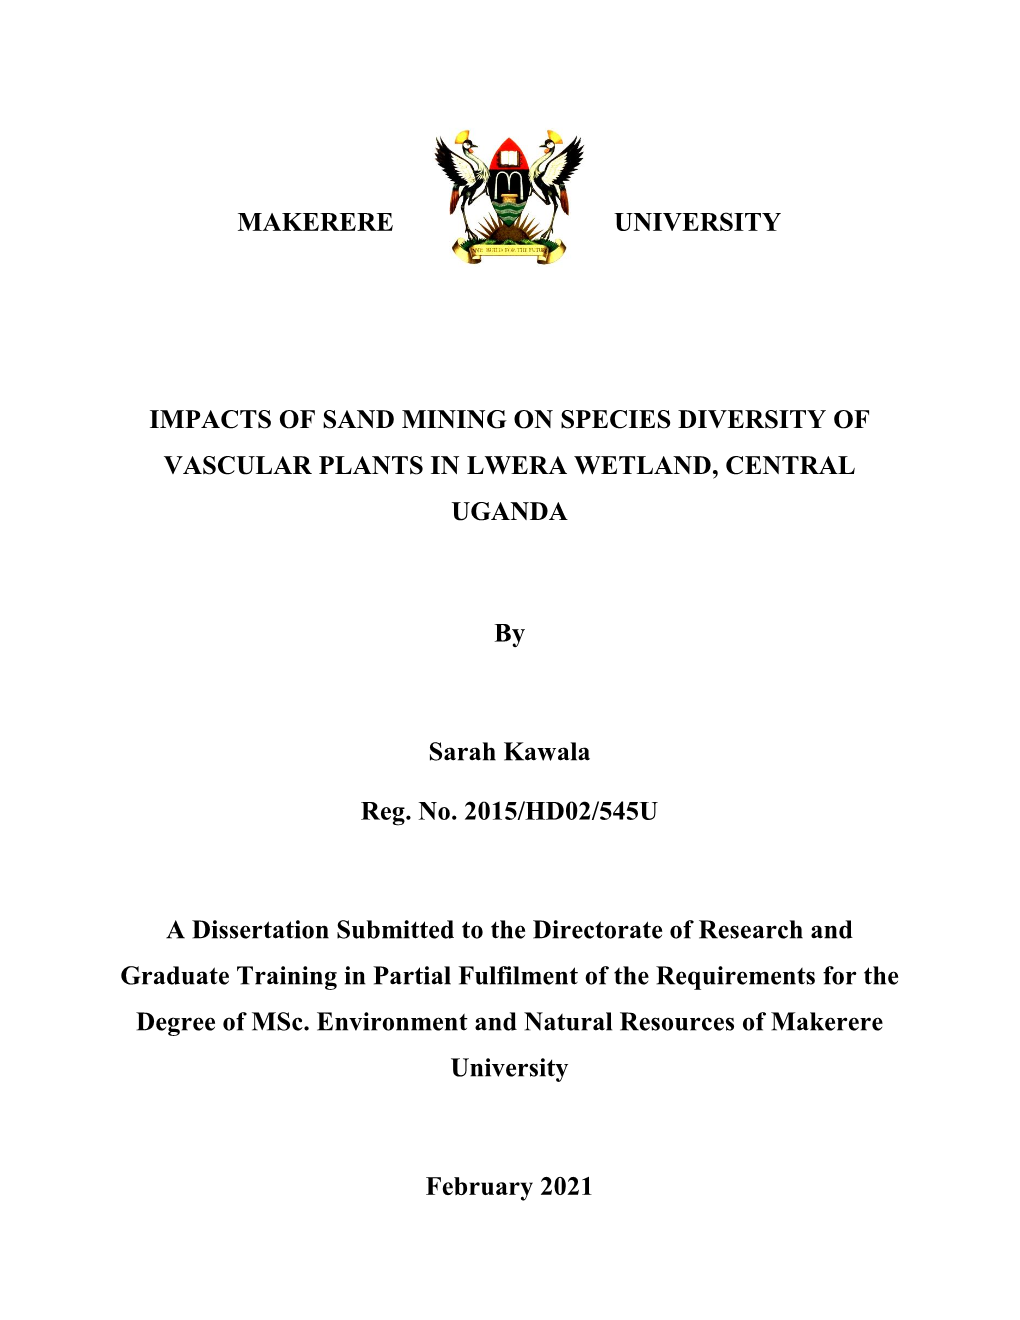 Makerere University Impacts of Sand Mining on Species